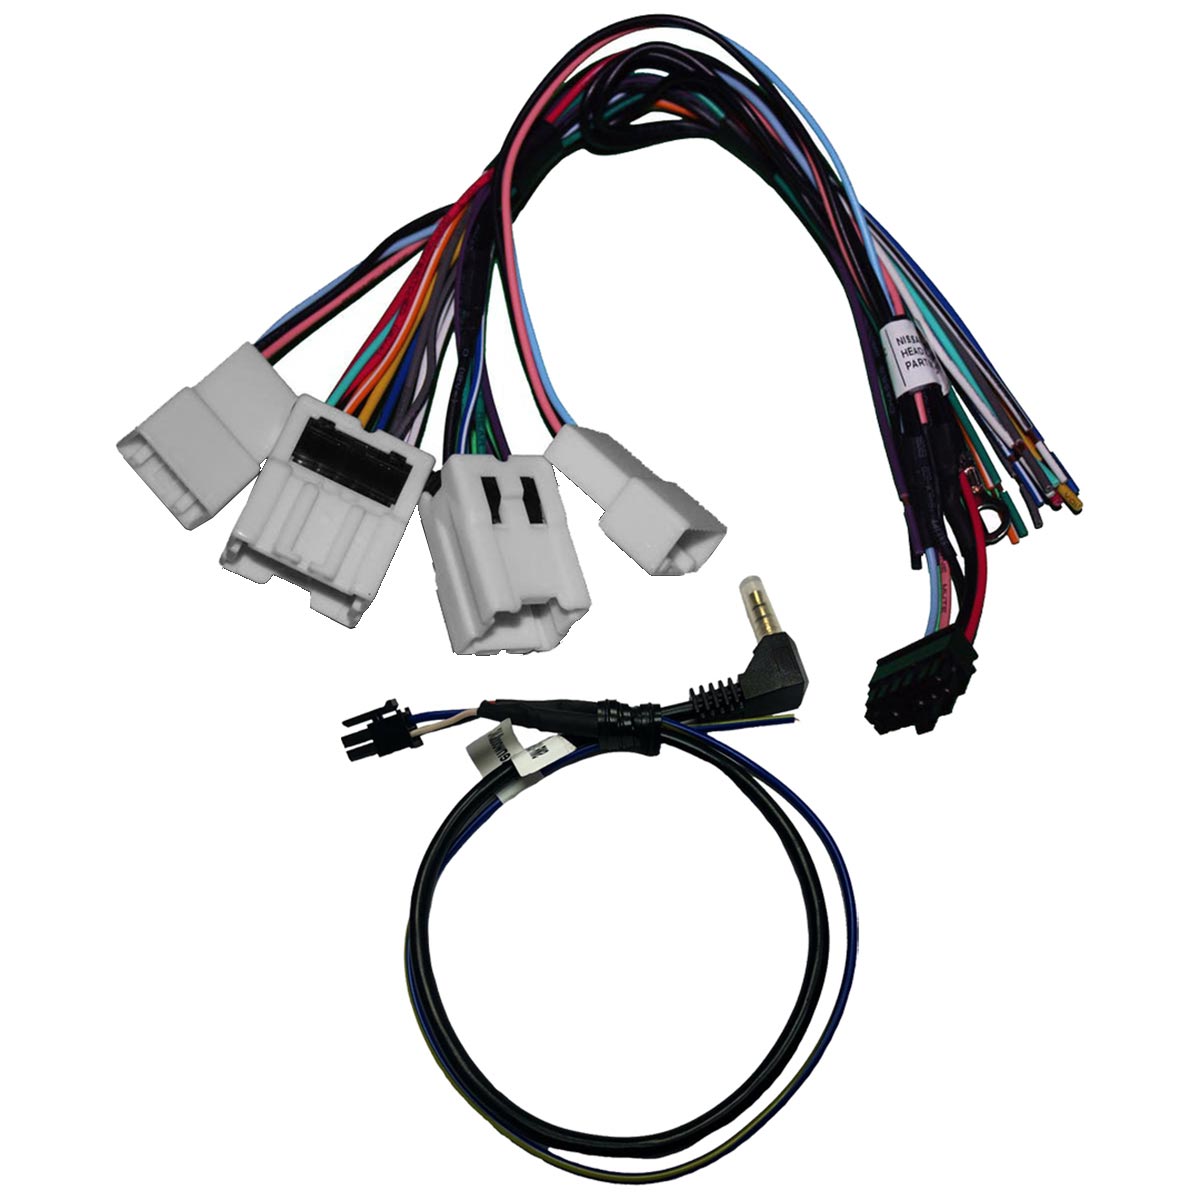 Crux Radio Replacement Interface For Select ’05-’11 Nissan Vehicles With Swc